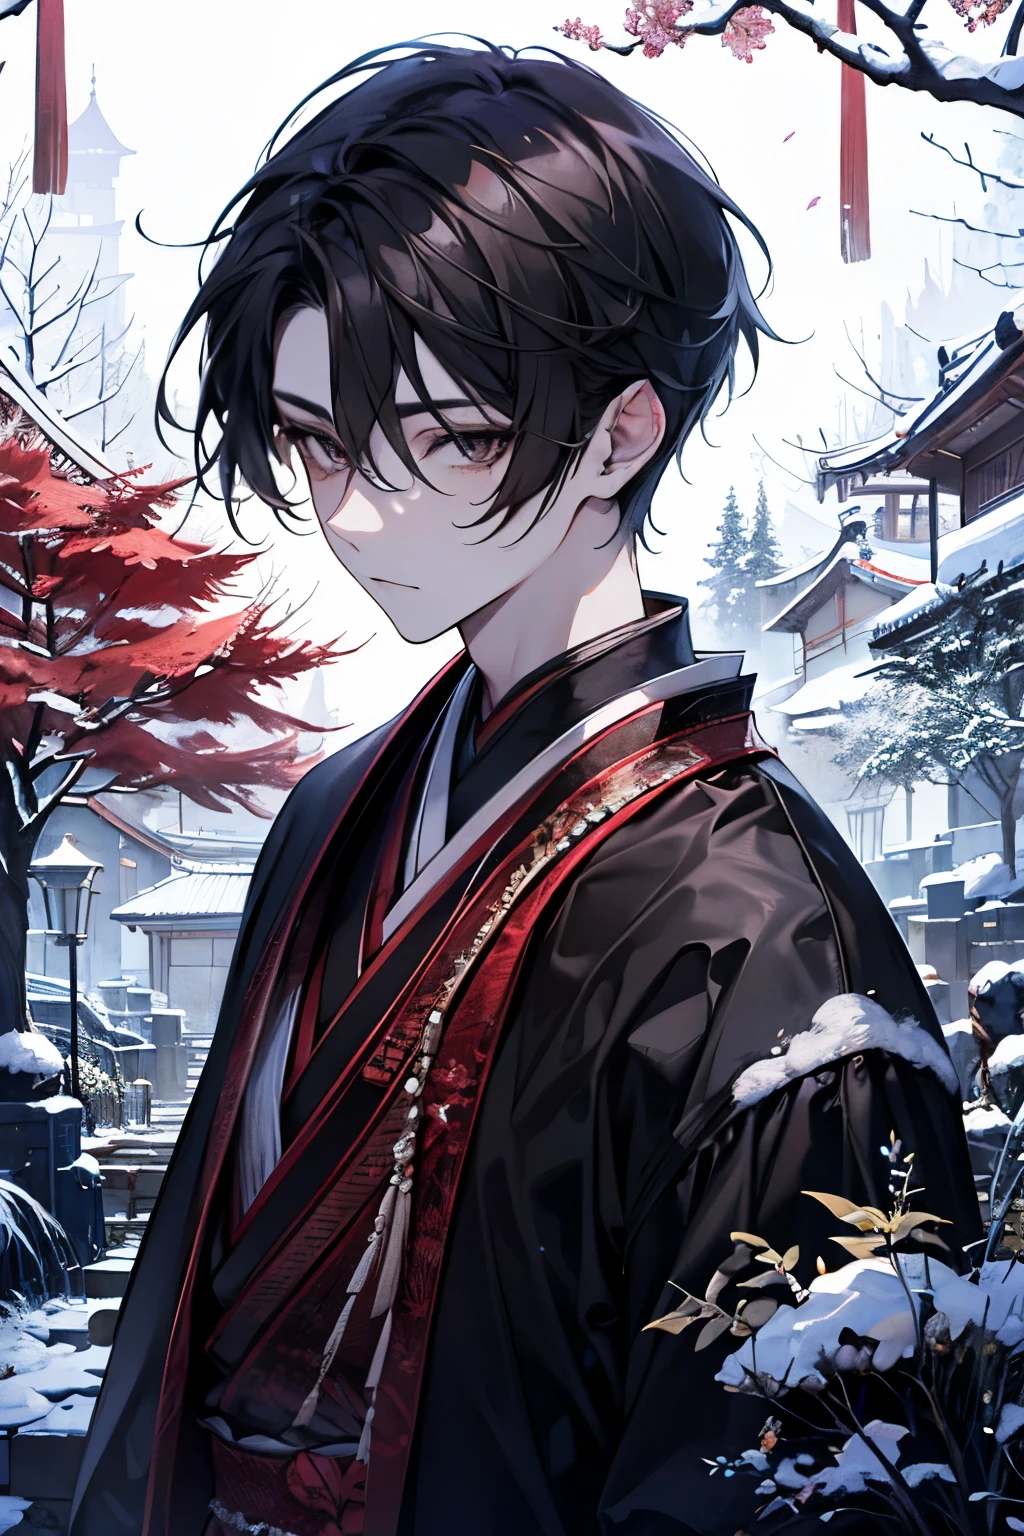 A handsome young man celebrates the New Year in a traditional Japanese setting. The moment just before he picks up a black cat and kisses it. A quiet garden covered with snow. The garden has a small pine tree and a stone lantern covered with snow, softly illuminated by the early morning light of the New Year. His features are smooth black hair, styled in a classic style, and deep brown eyes that reflect the hopeful beginning of the New Year